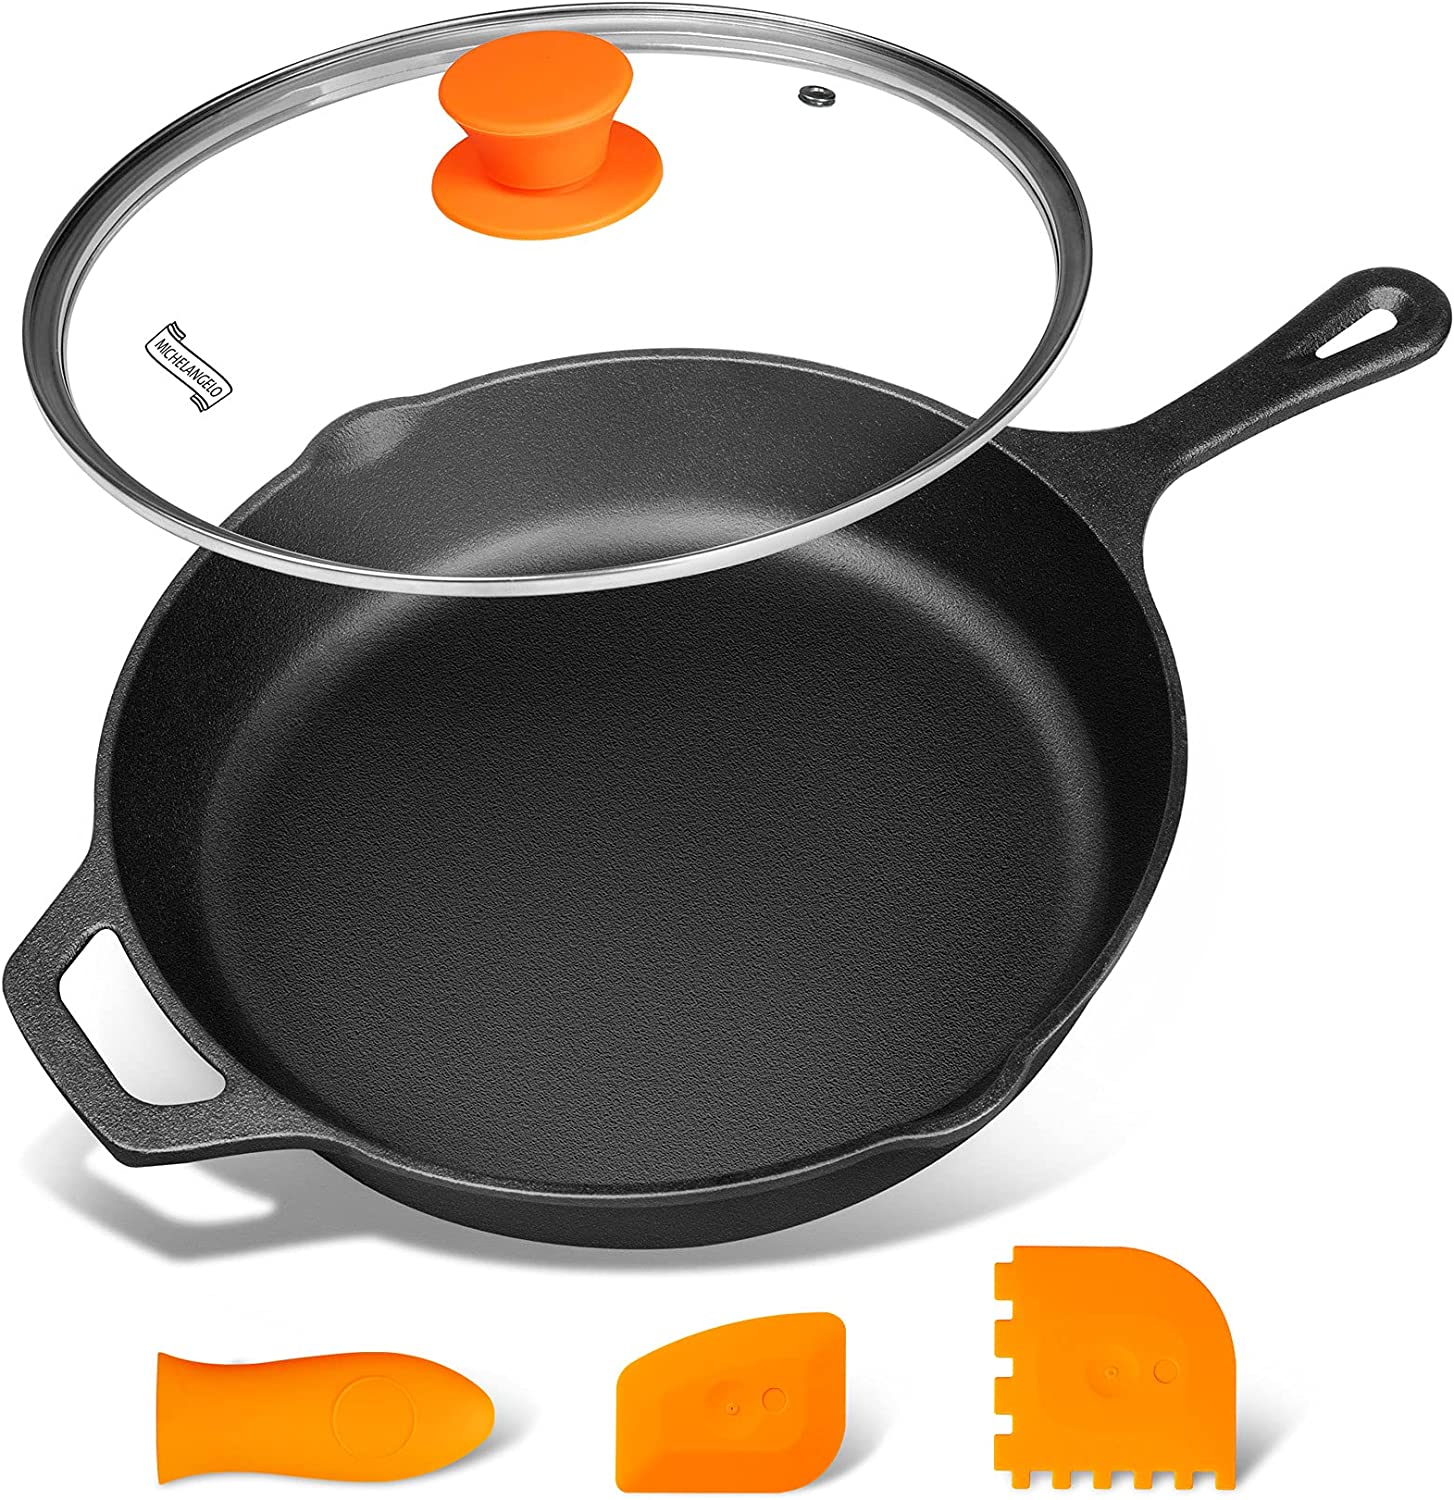 MICHELANGELO 3-Ply Easy Clean Cast Iron Skillet With Lid, 10-Inch